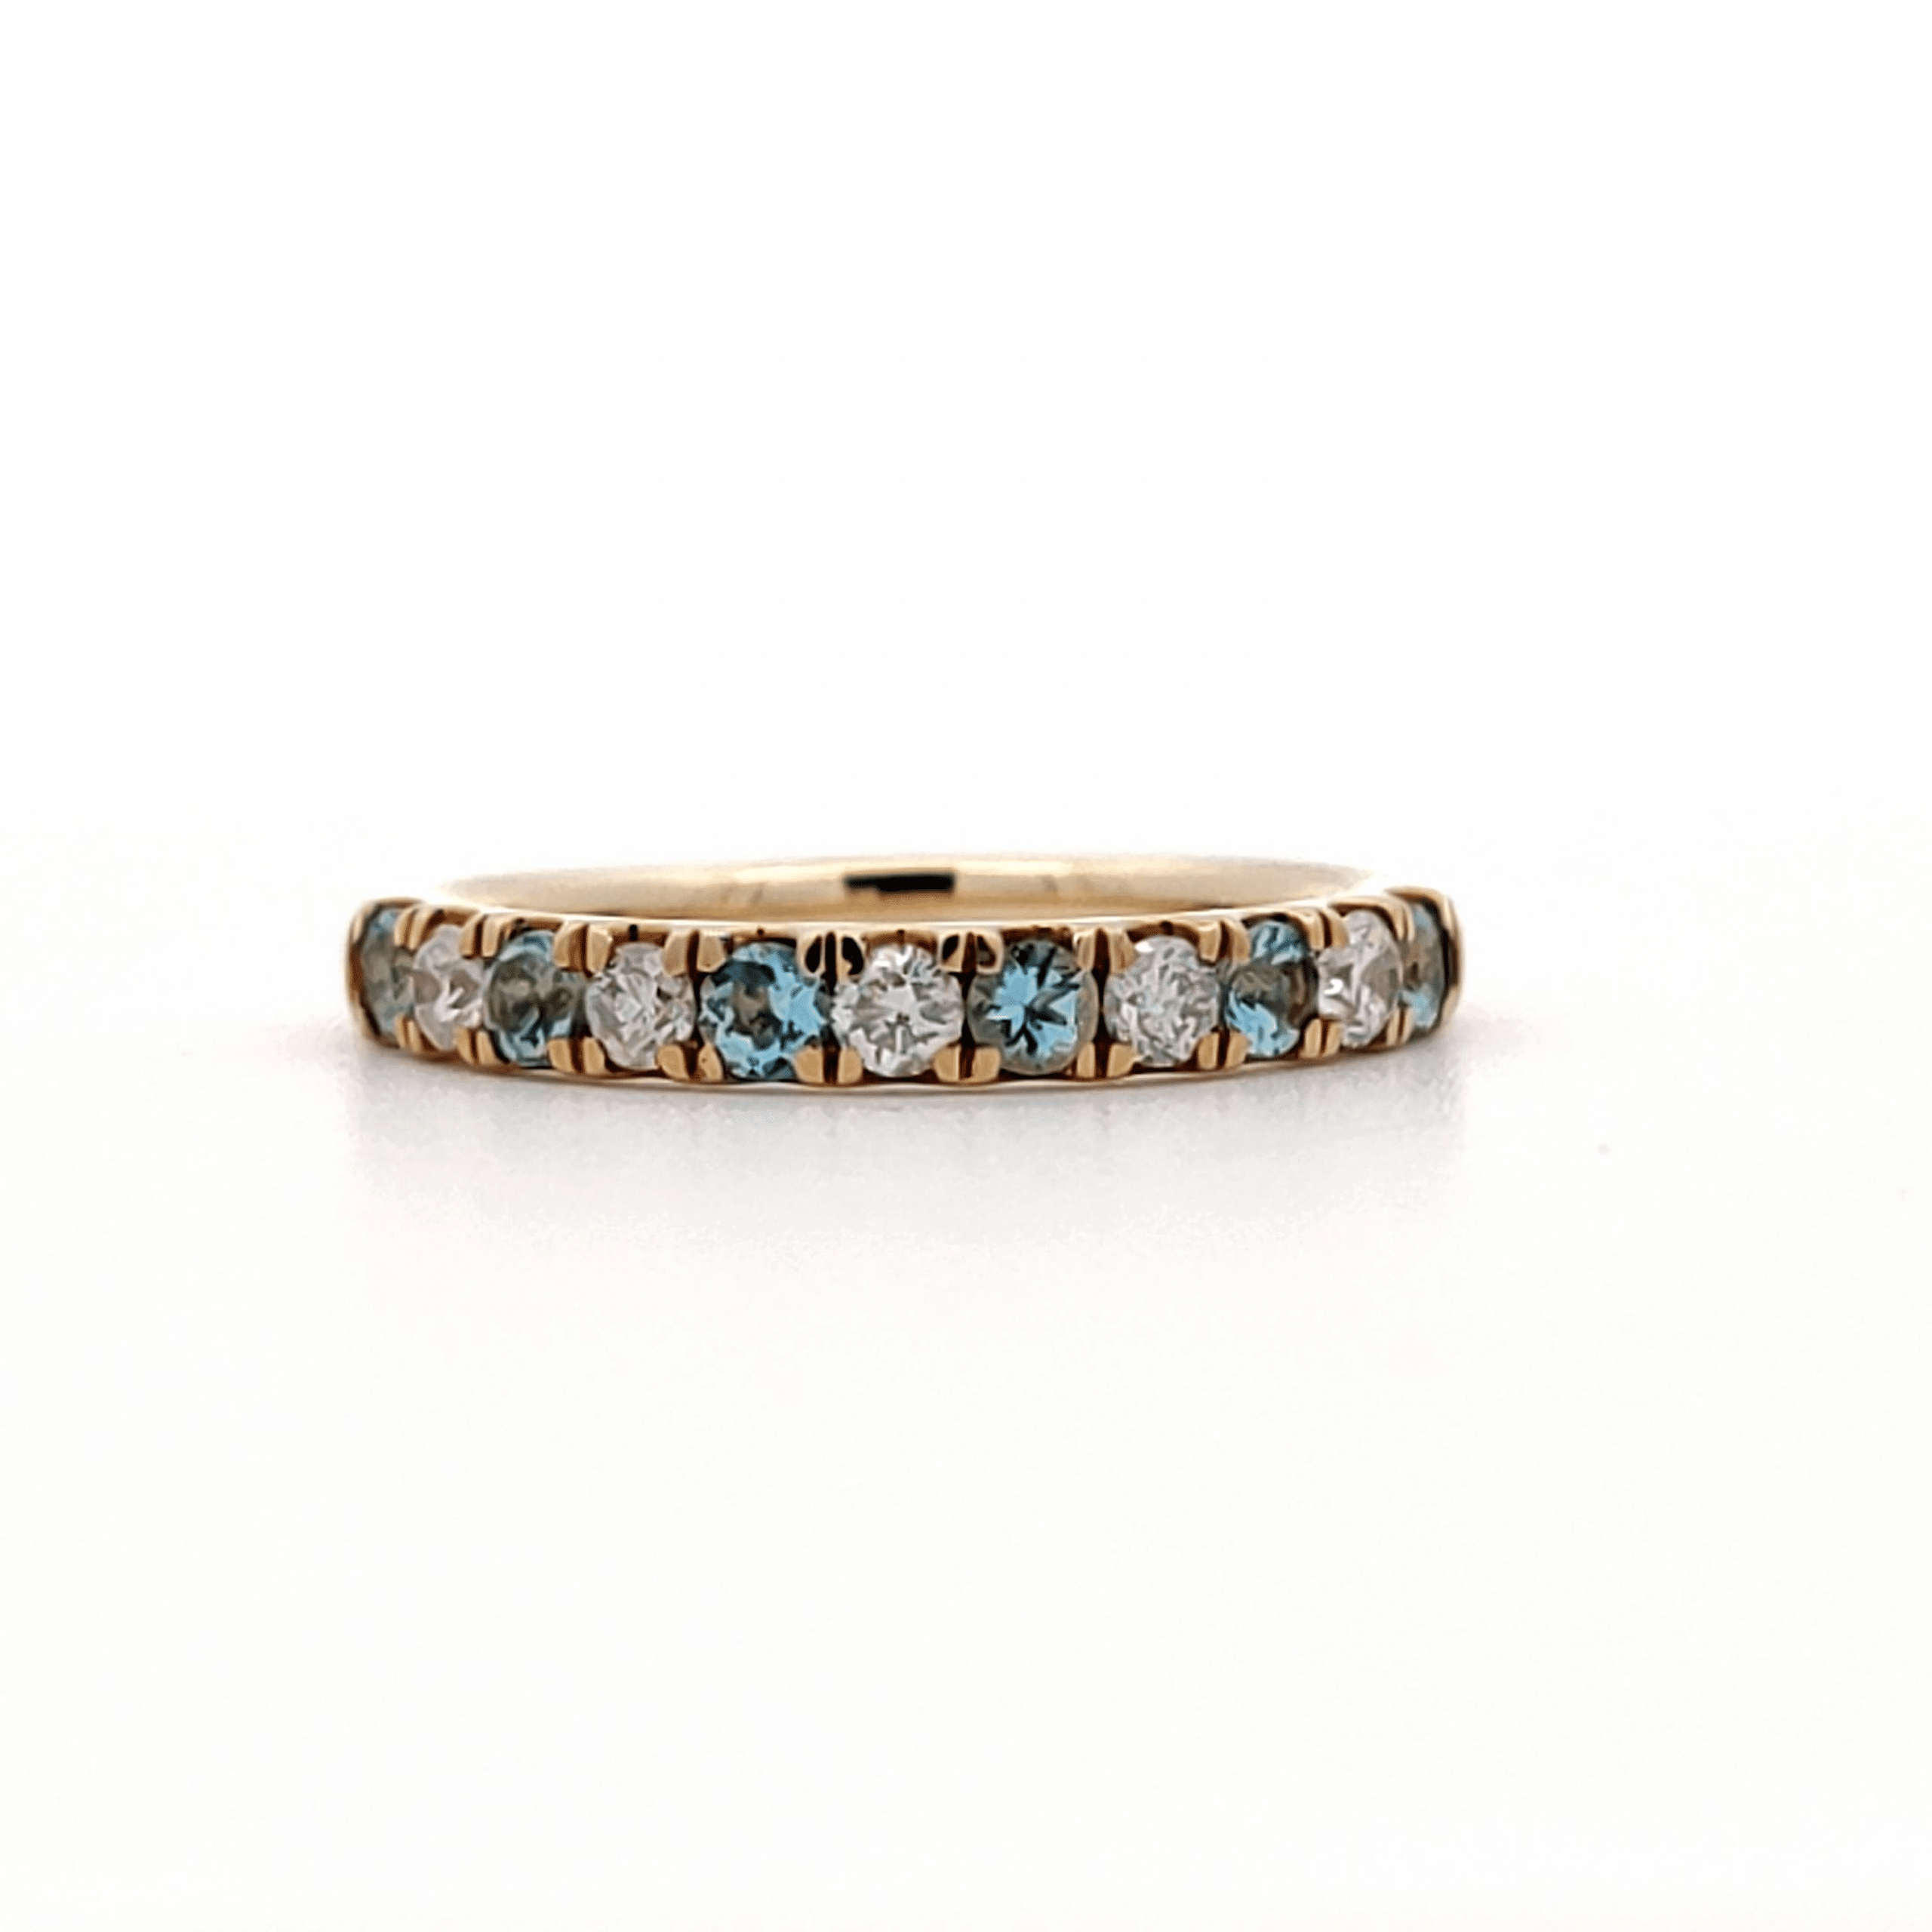 0.37ct Blue Topaz and 0.29ct Diamond Ring set in Yellow Gold